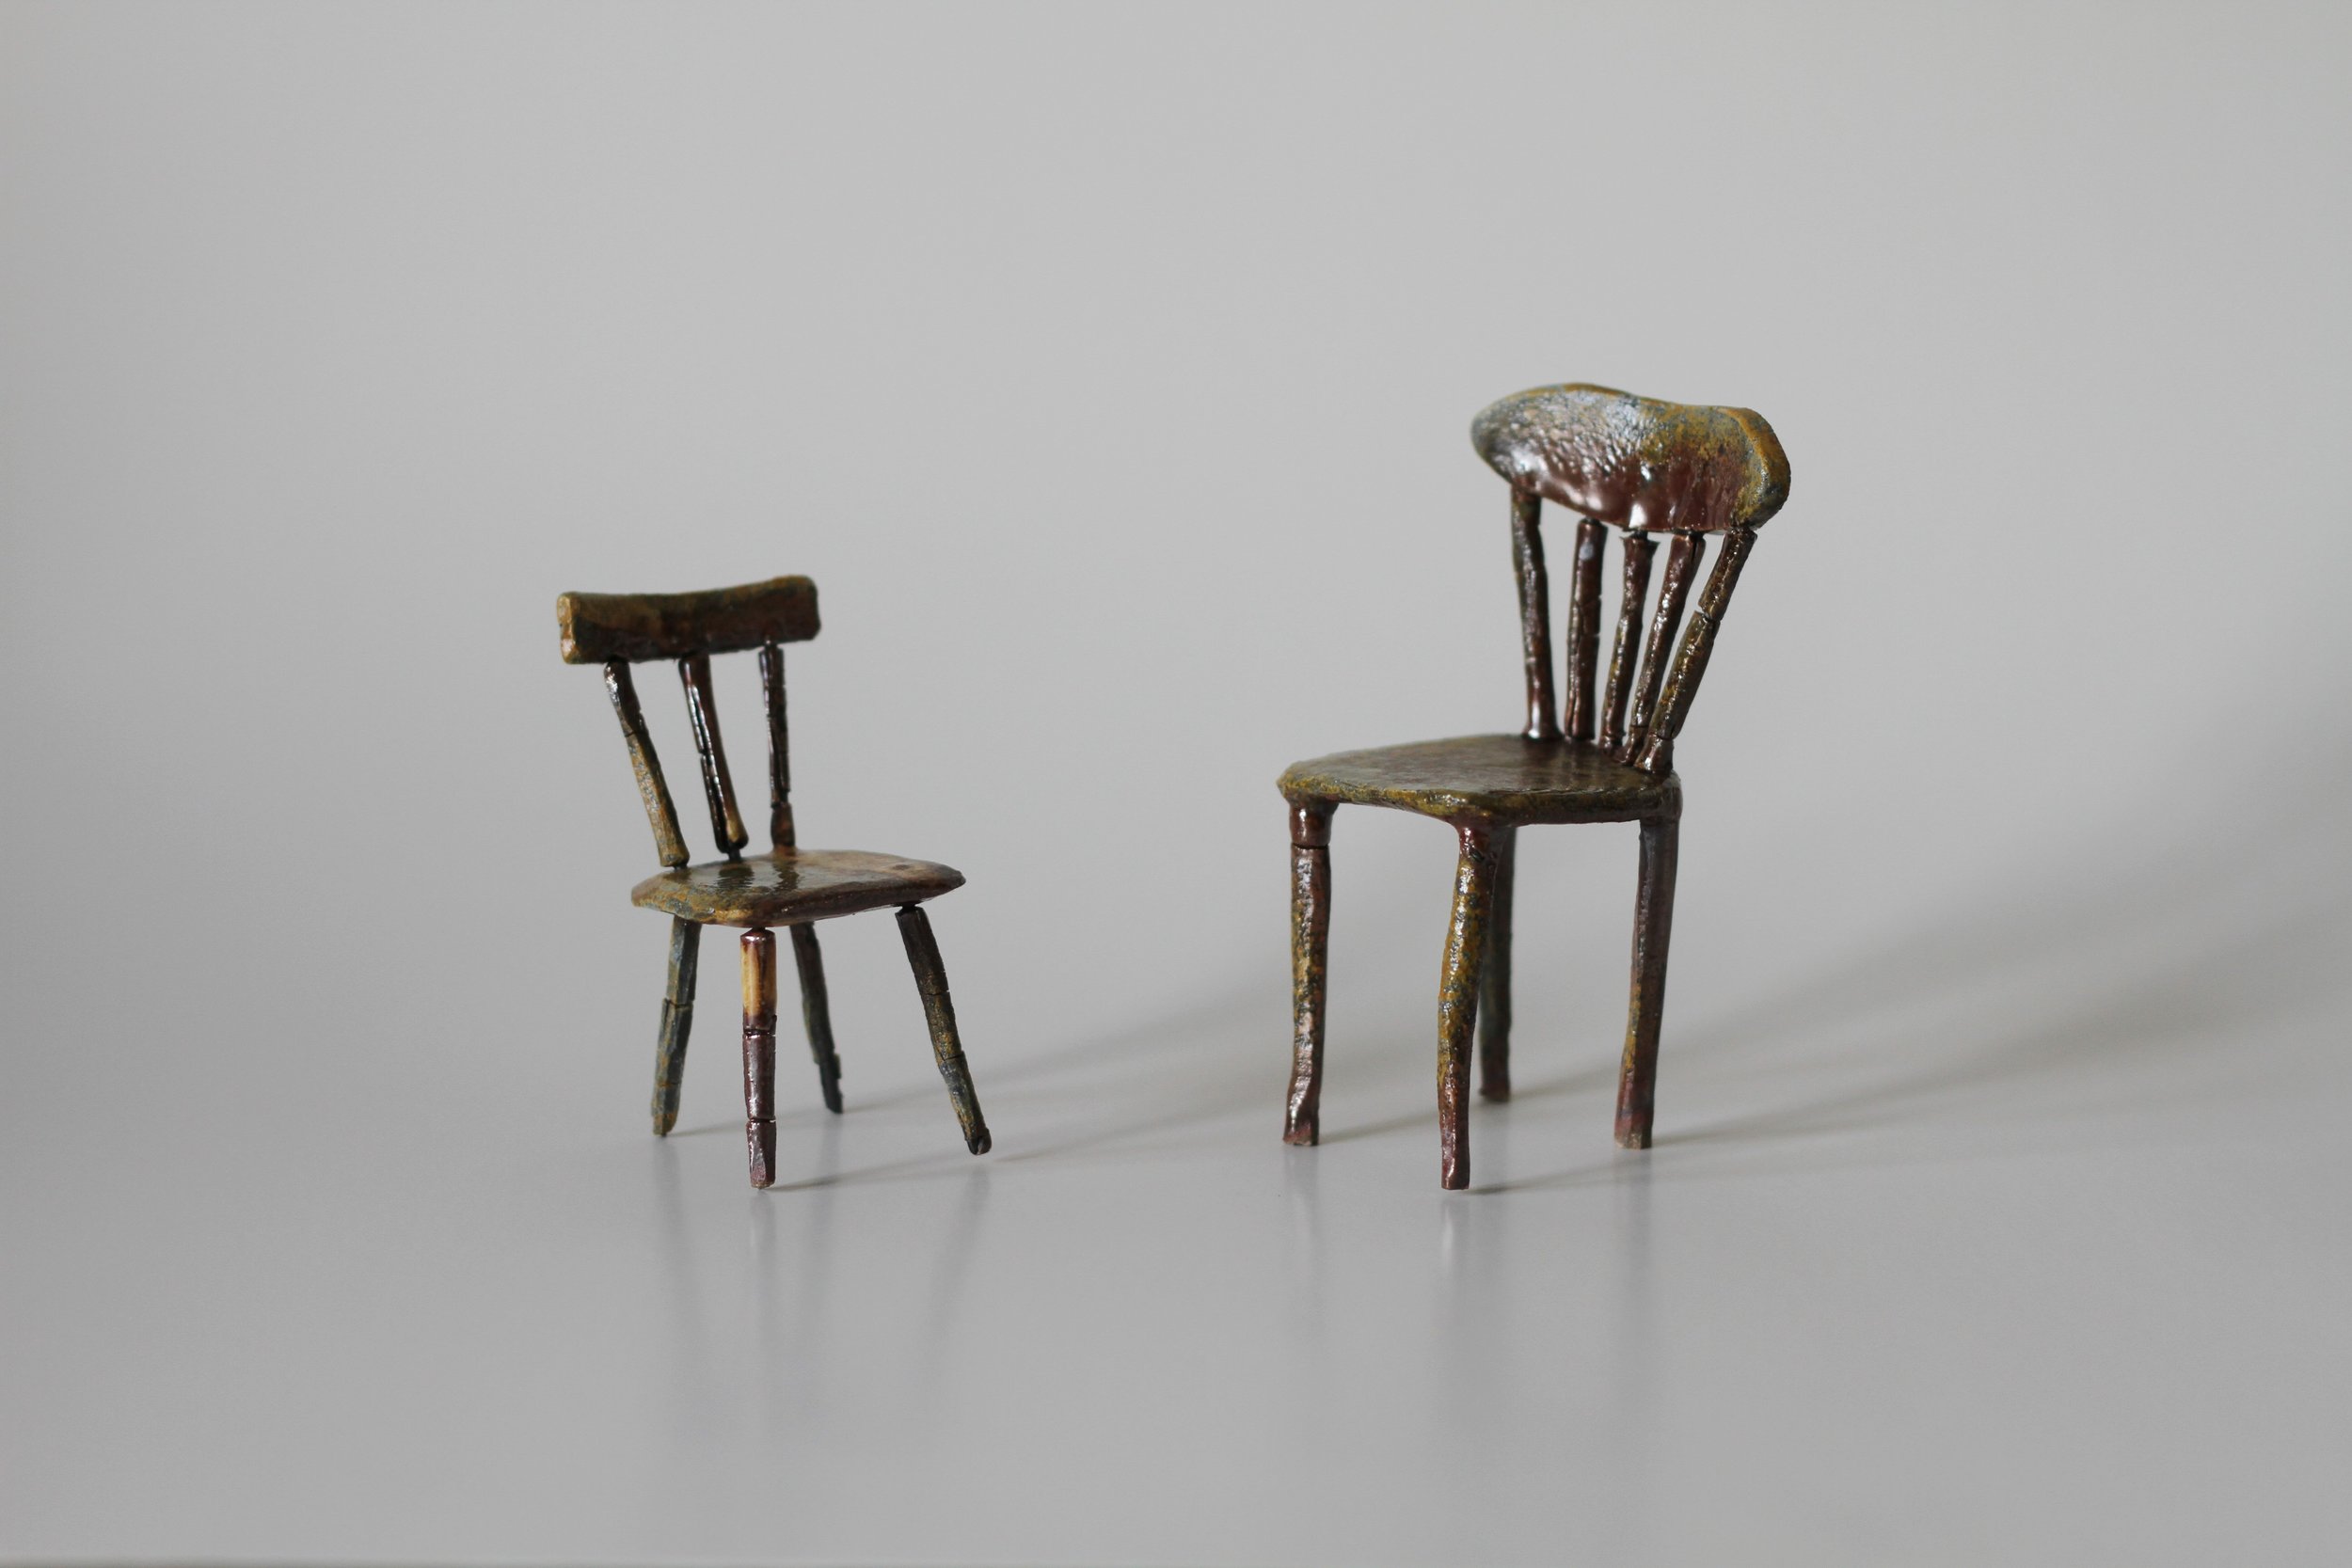 lonely chairs (woodfired)